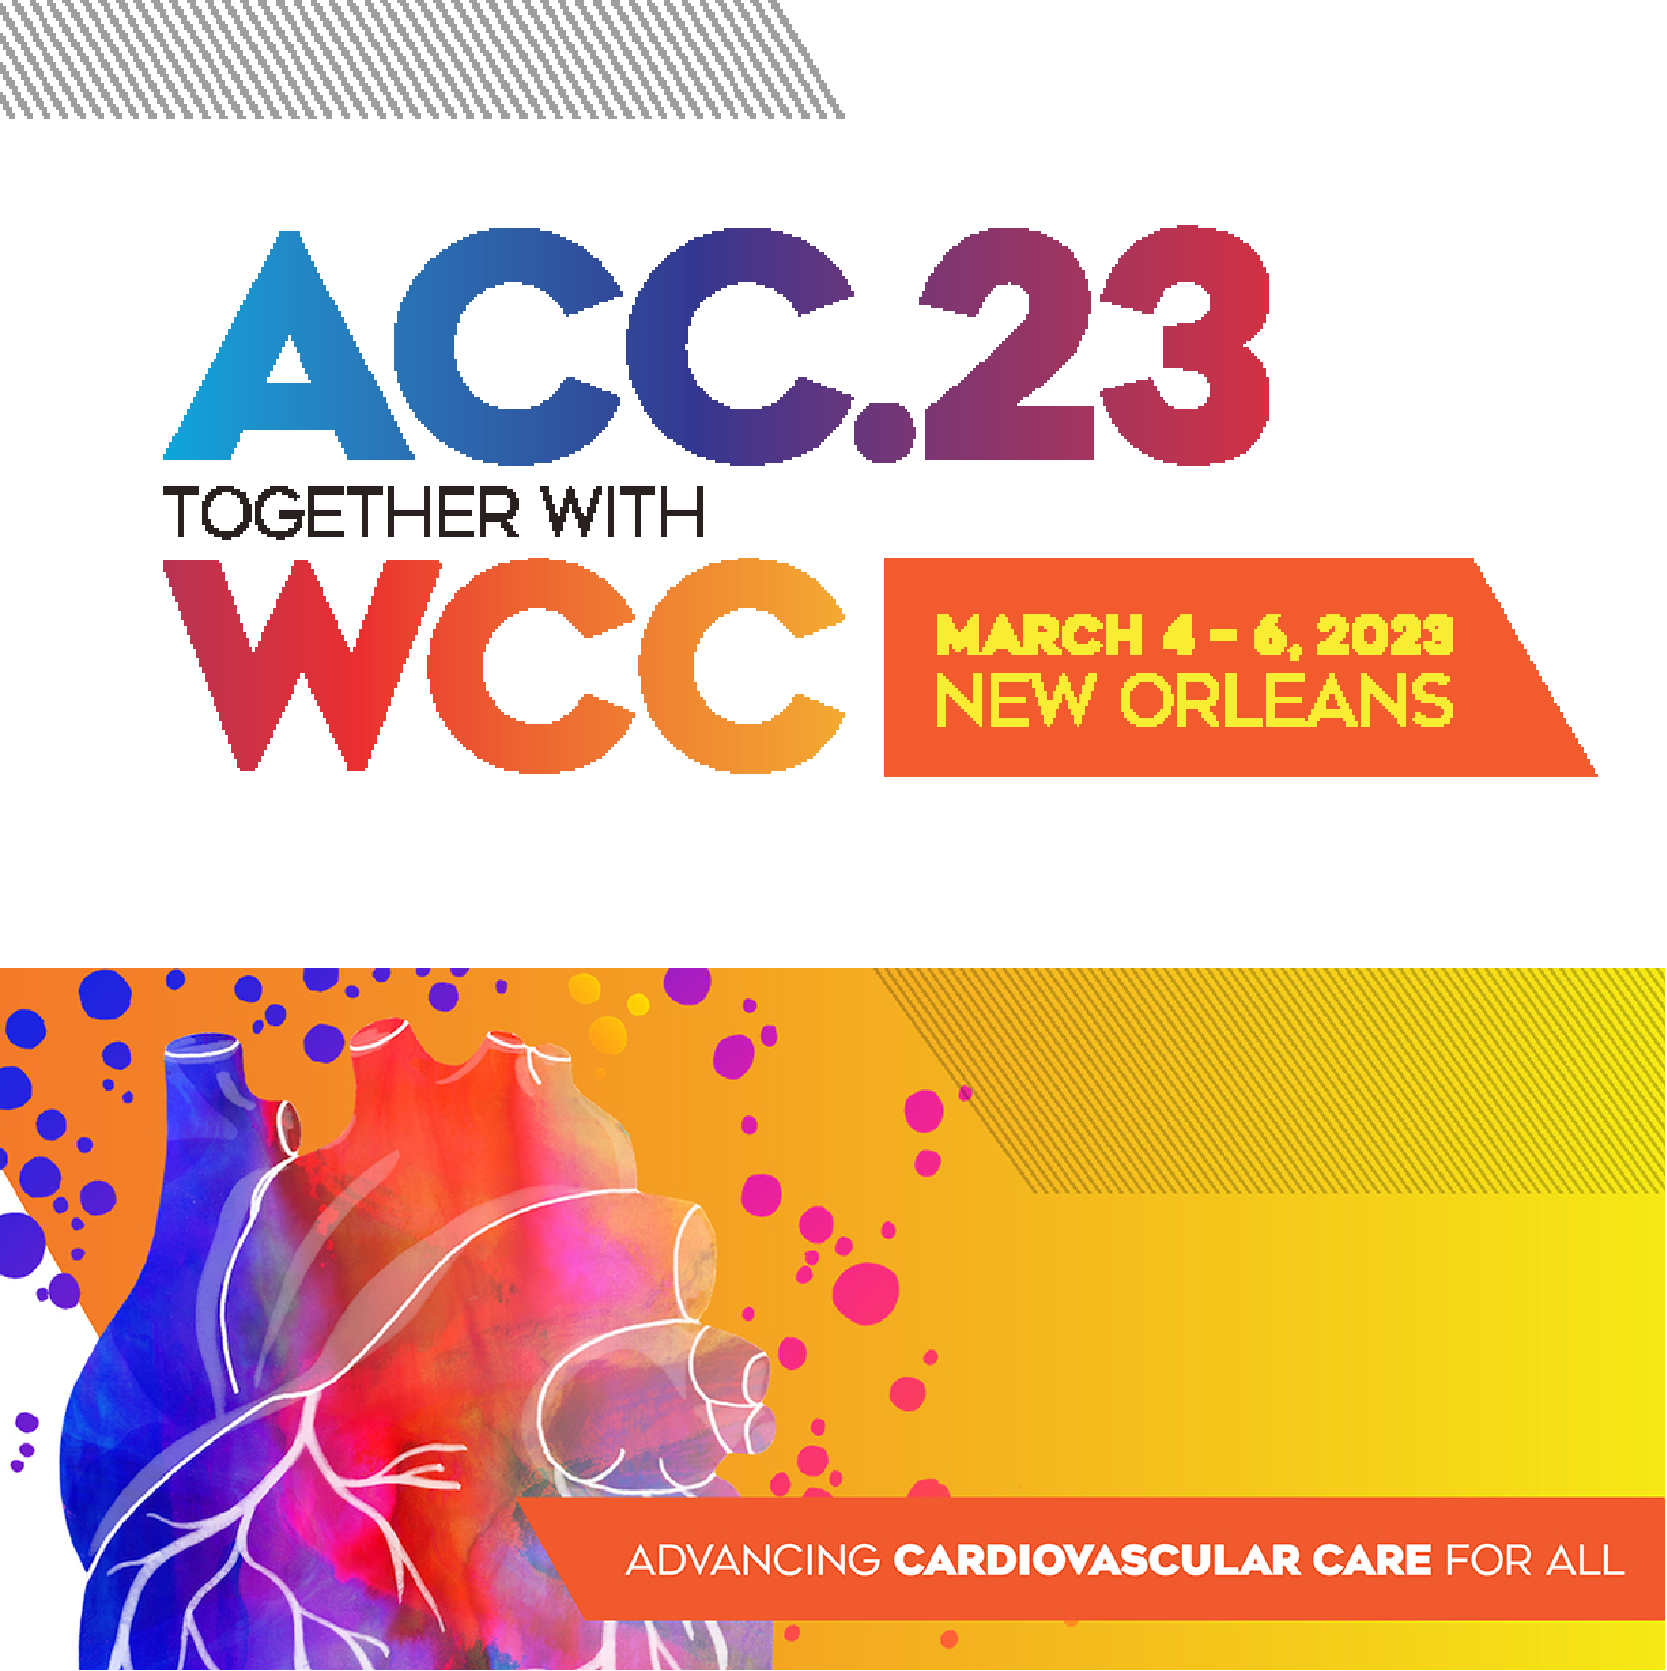 World Congress of Cardiology- ACC.23